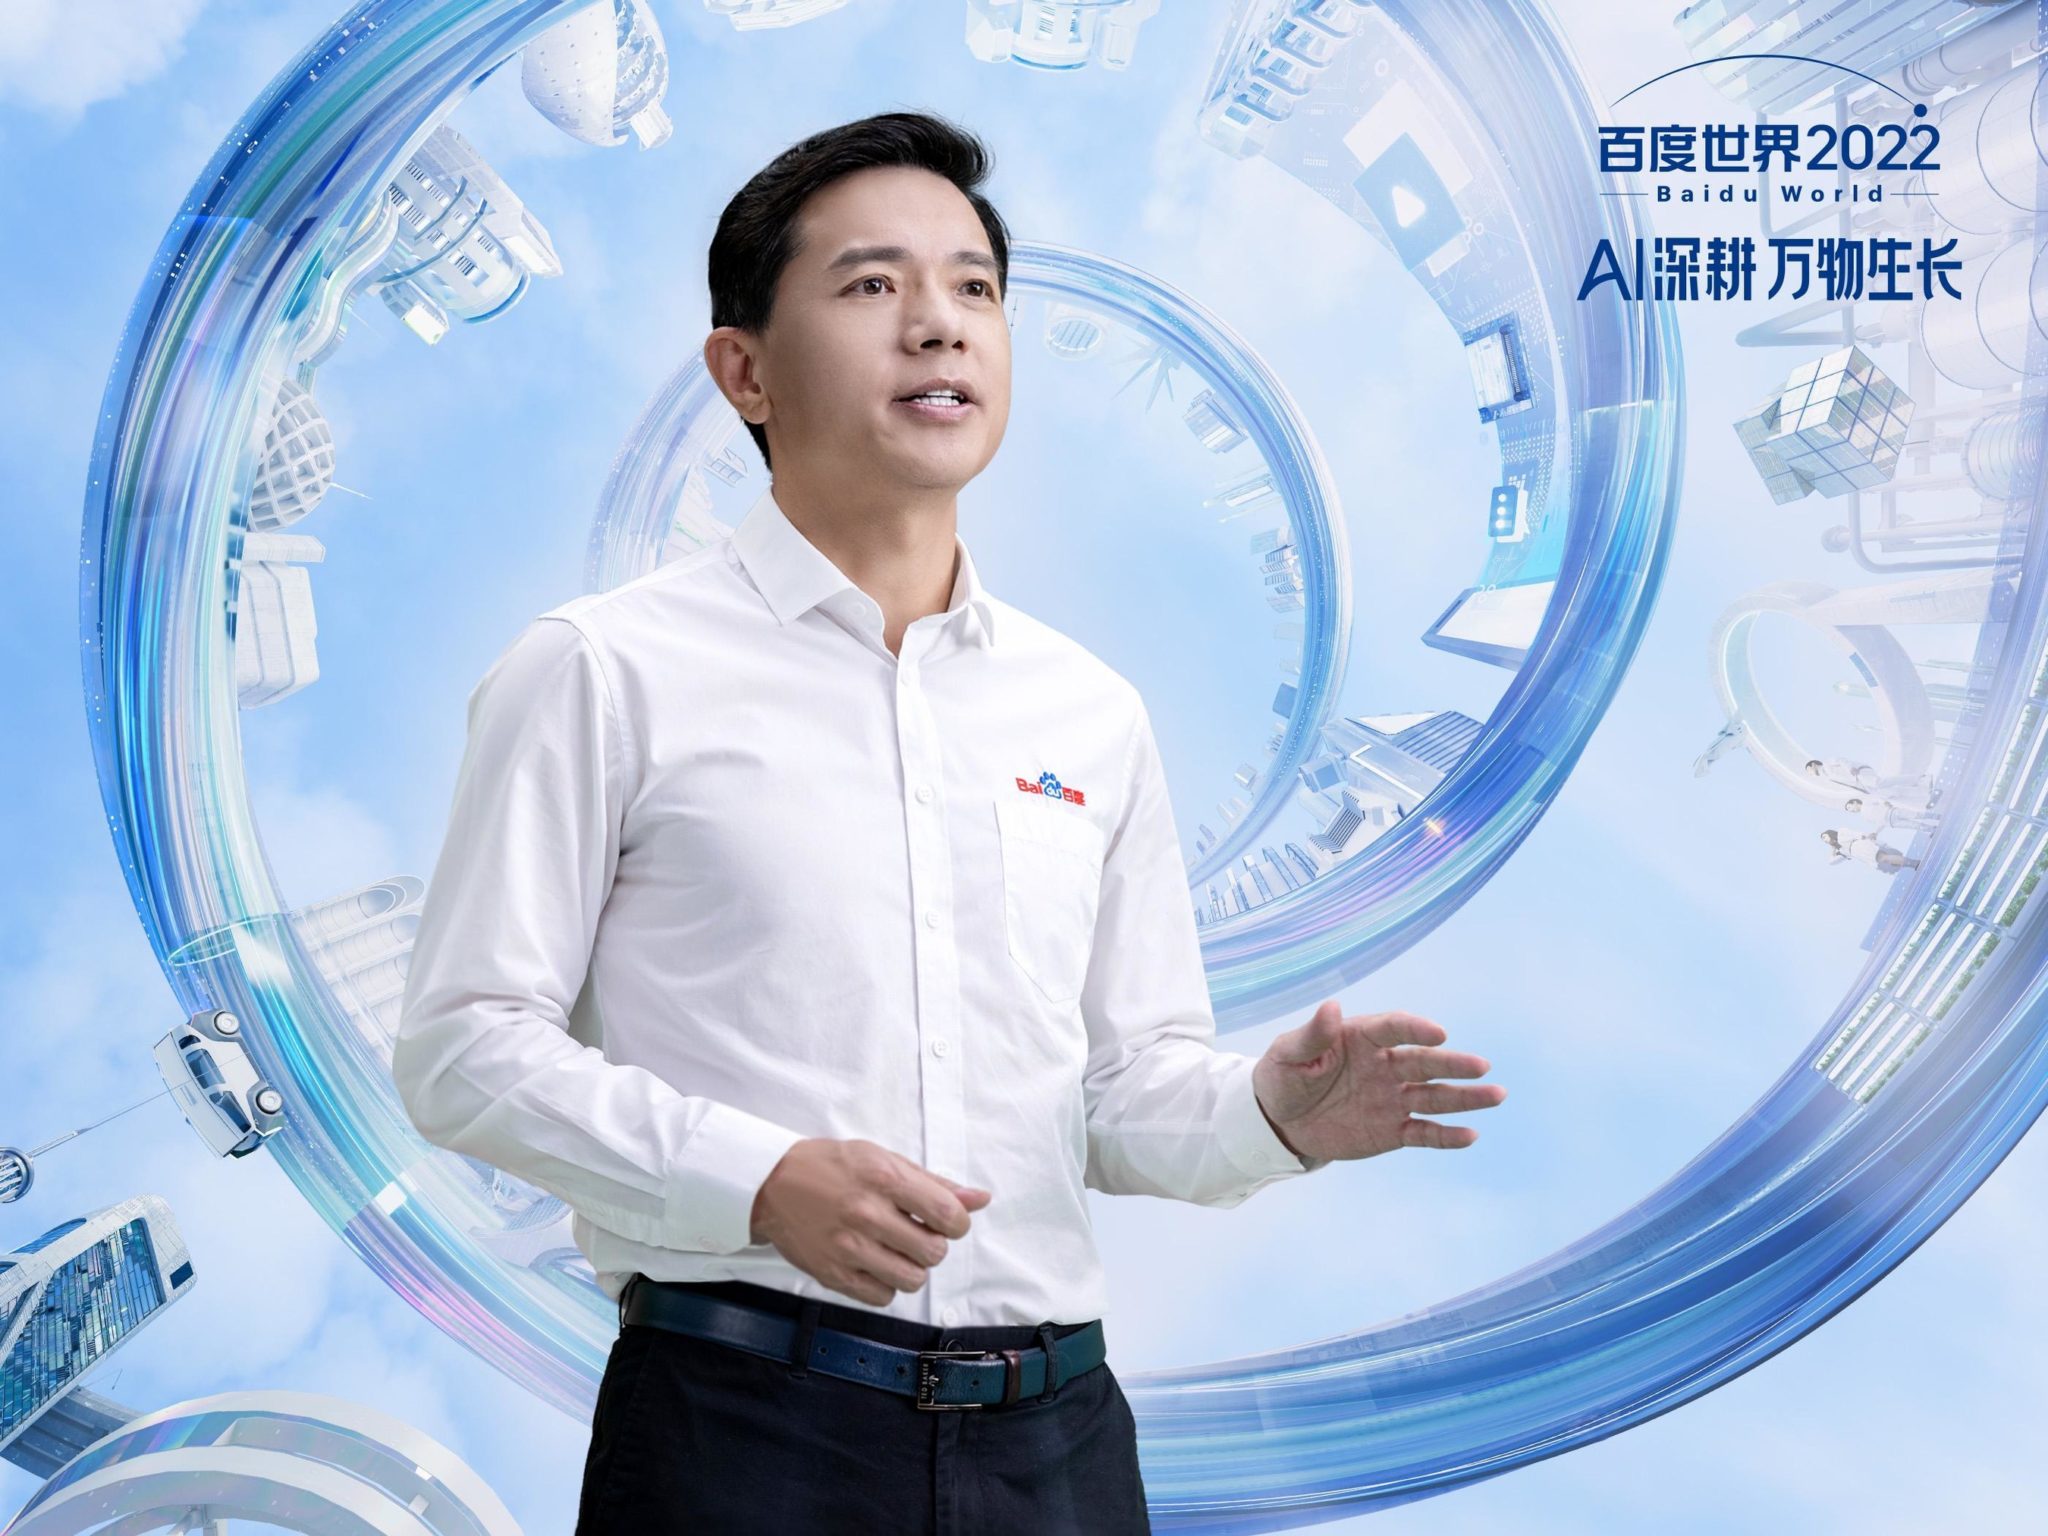 Baidu Debuts Latest AI Tech at Annual Conference